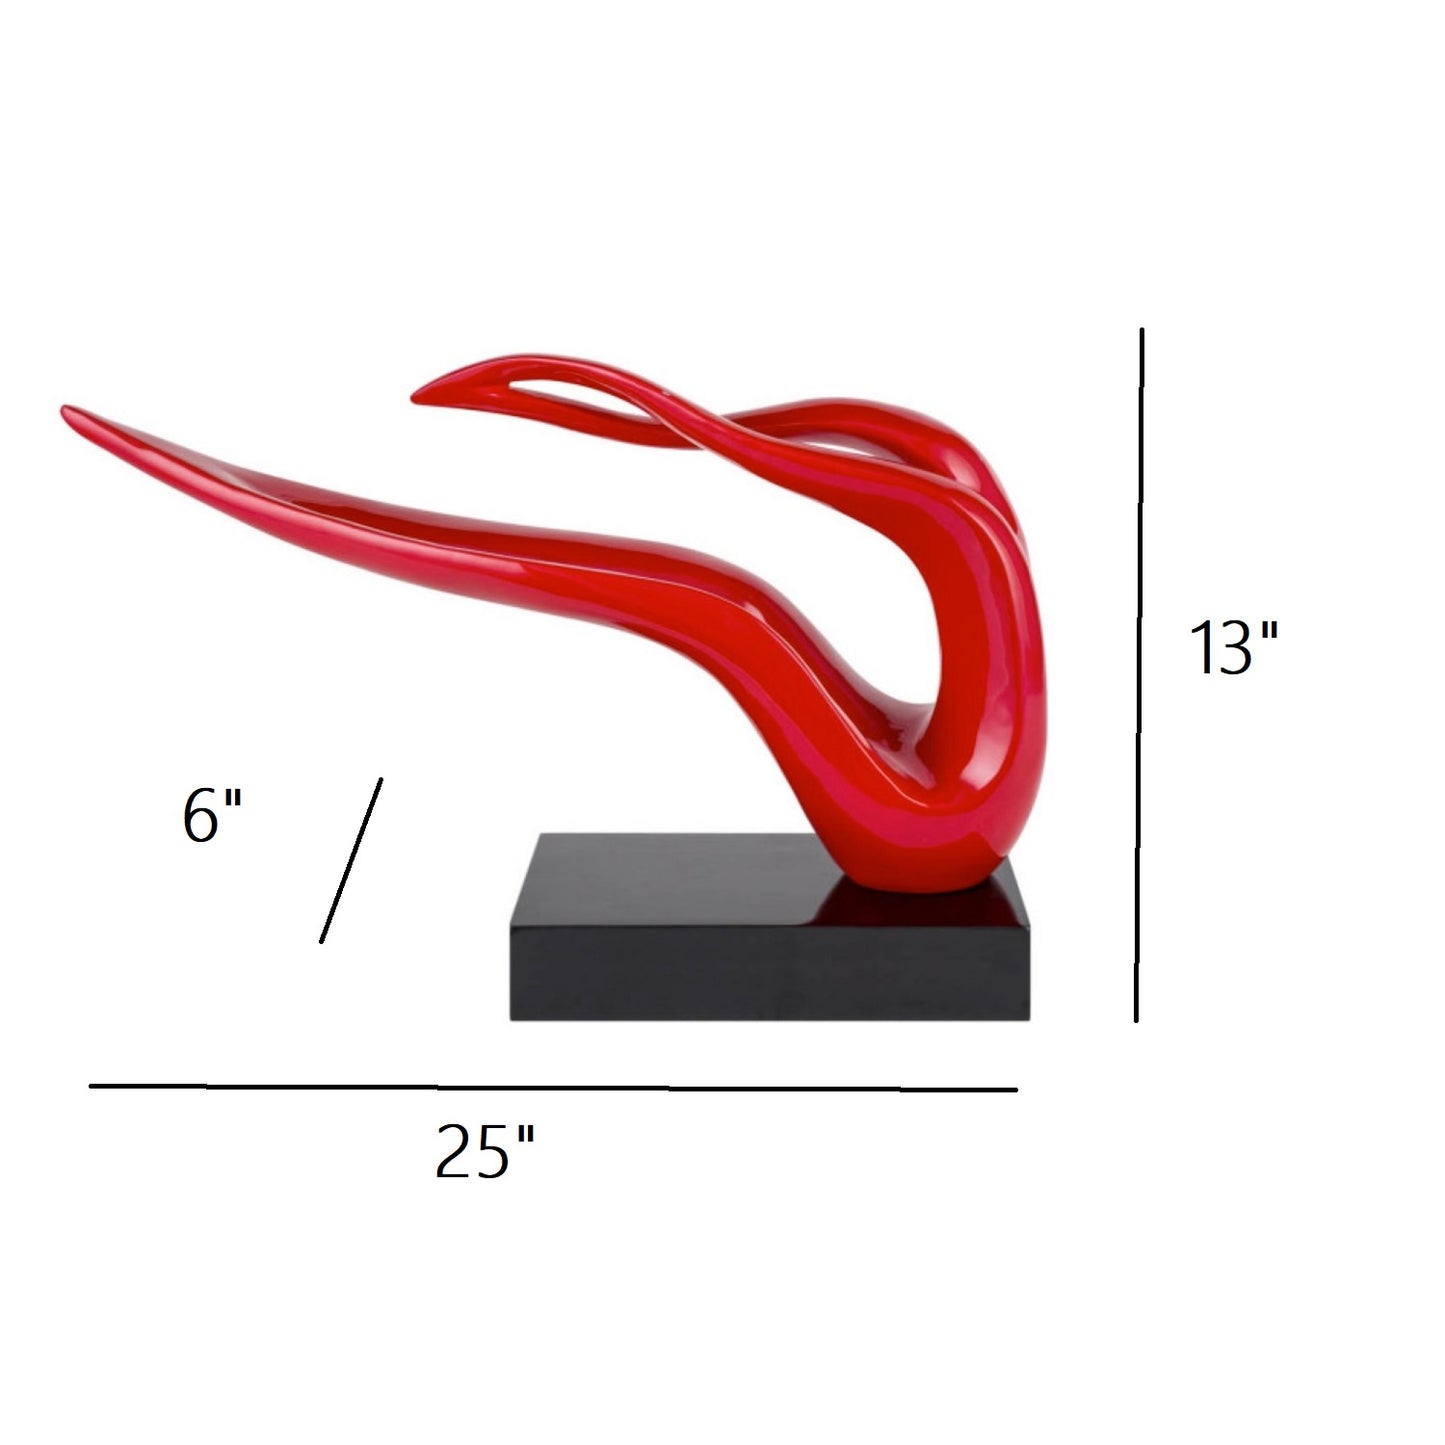 RAALS Abstract Ribbon Statue in Red